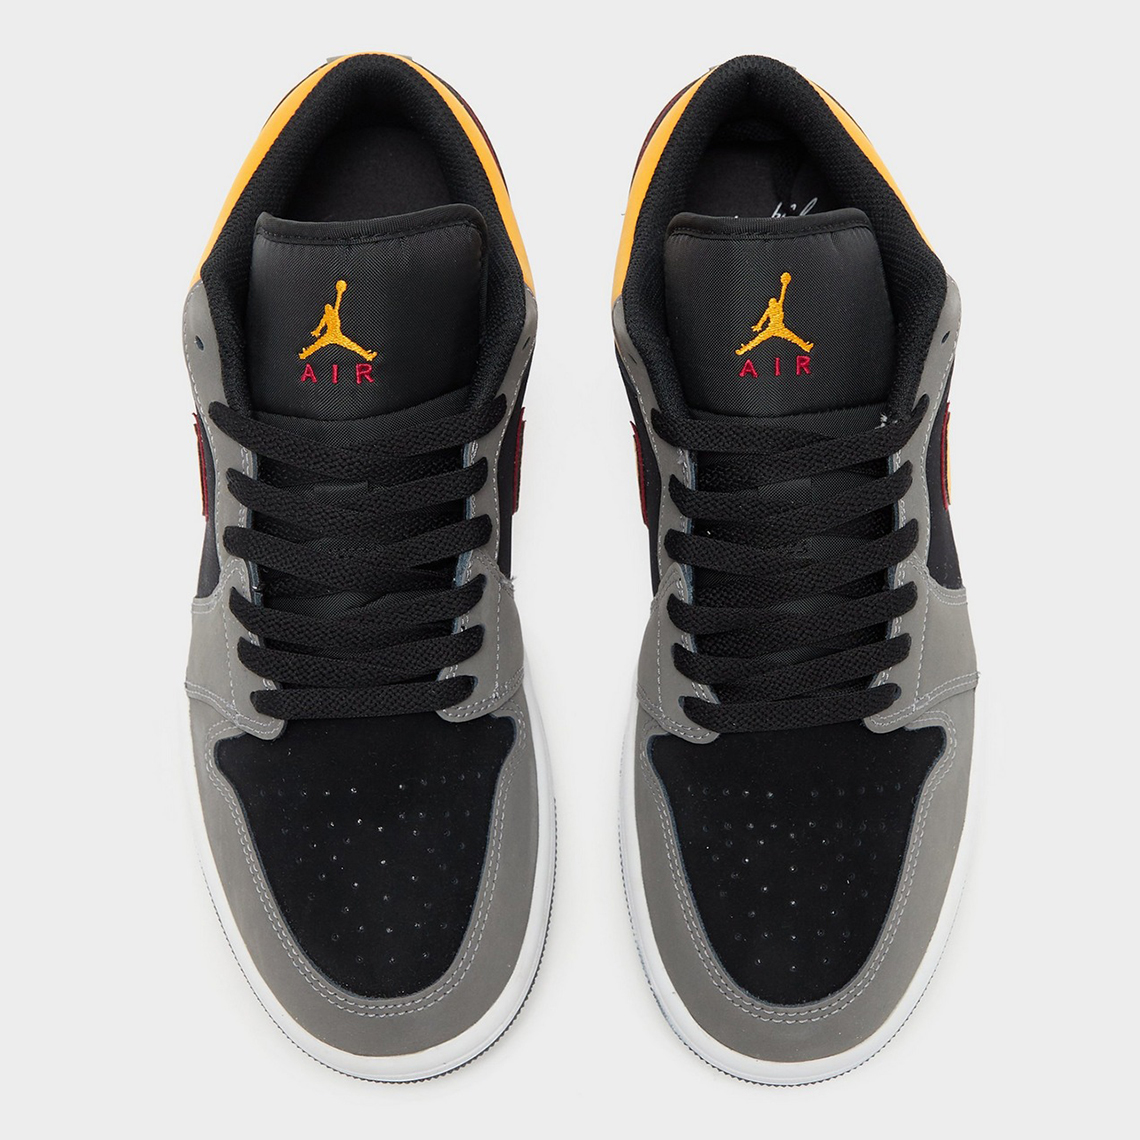 jordan why not zer0 1 low black ar0043 001 release date Low Grey Black Yellow Padded Tongue 1